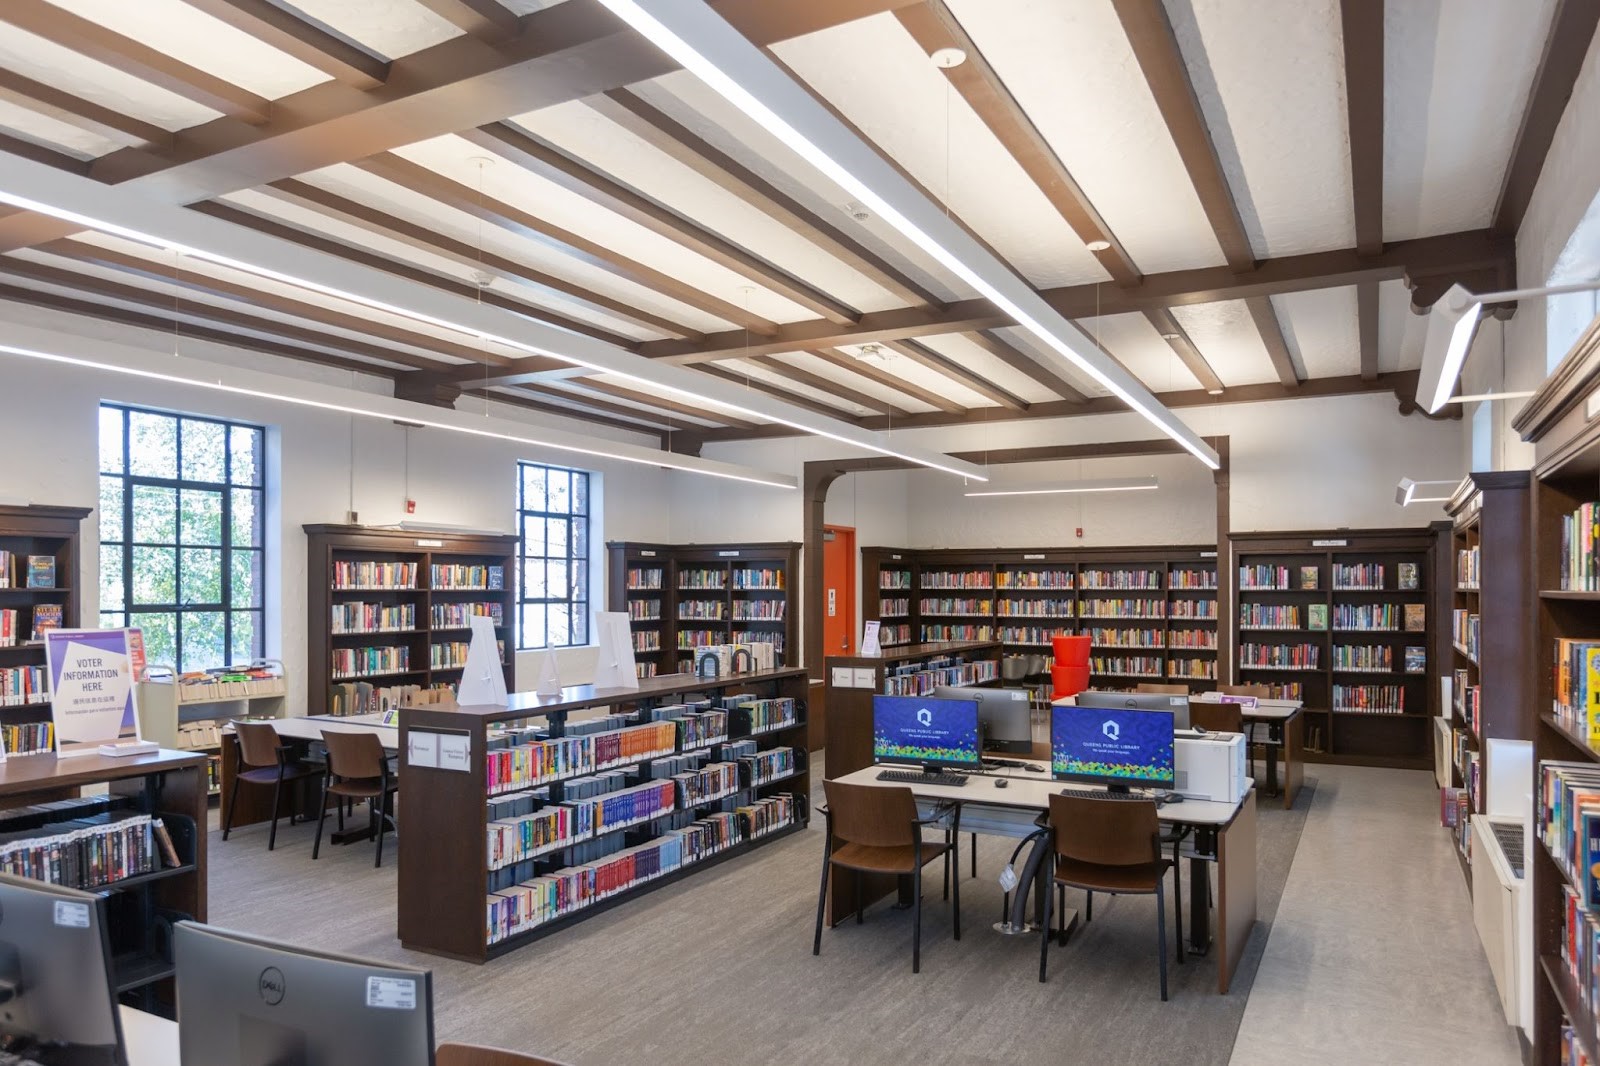 The improvement and rehabilitation project at Glendale Library brings a reorganized design to improve functionality throughout the three floors.